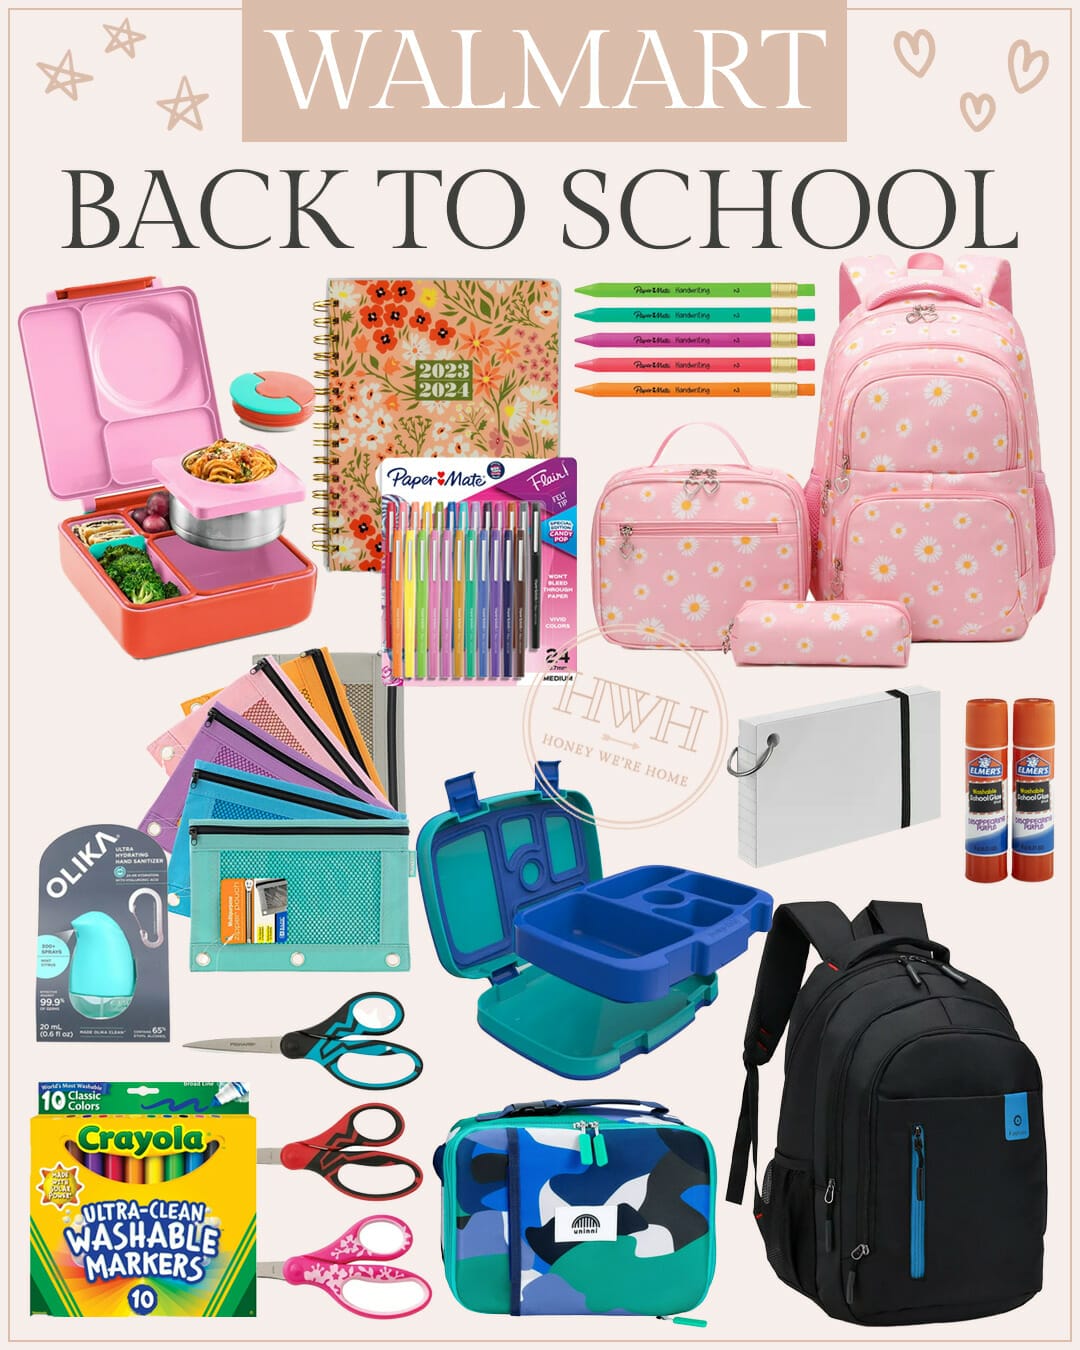 Our Back to School Routine & The Cutest New Styles at Walmart